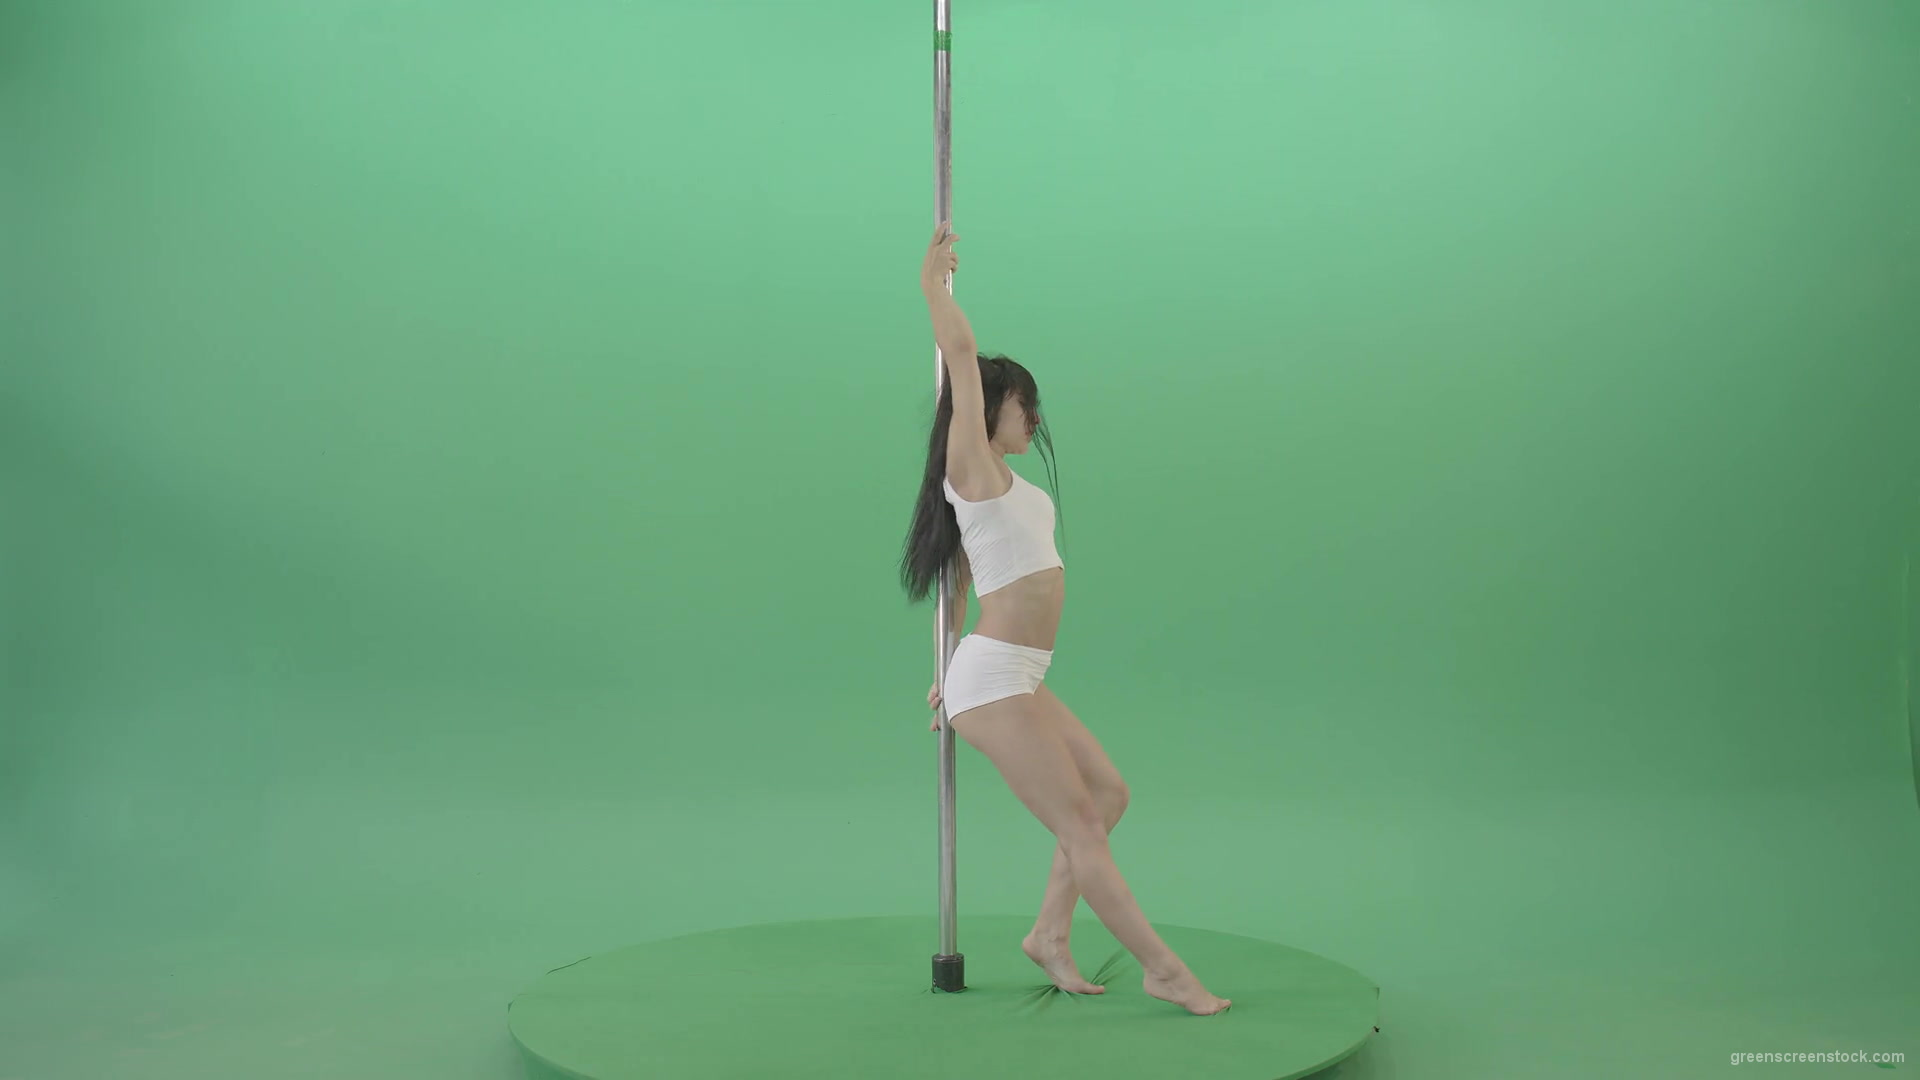 Green-Screen-Woman-spinning-gracefully-on-pole-dance-Video-Footage-1920_009 Green Screen Stock